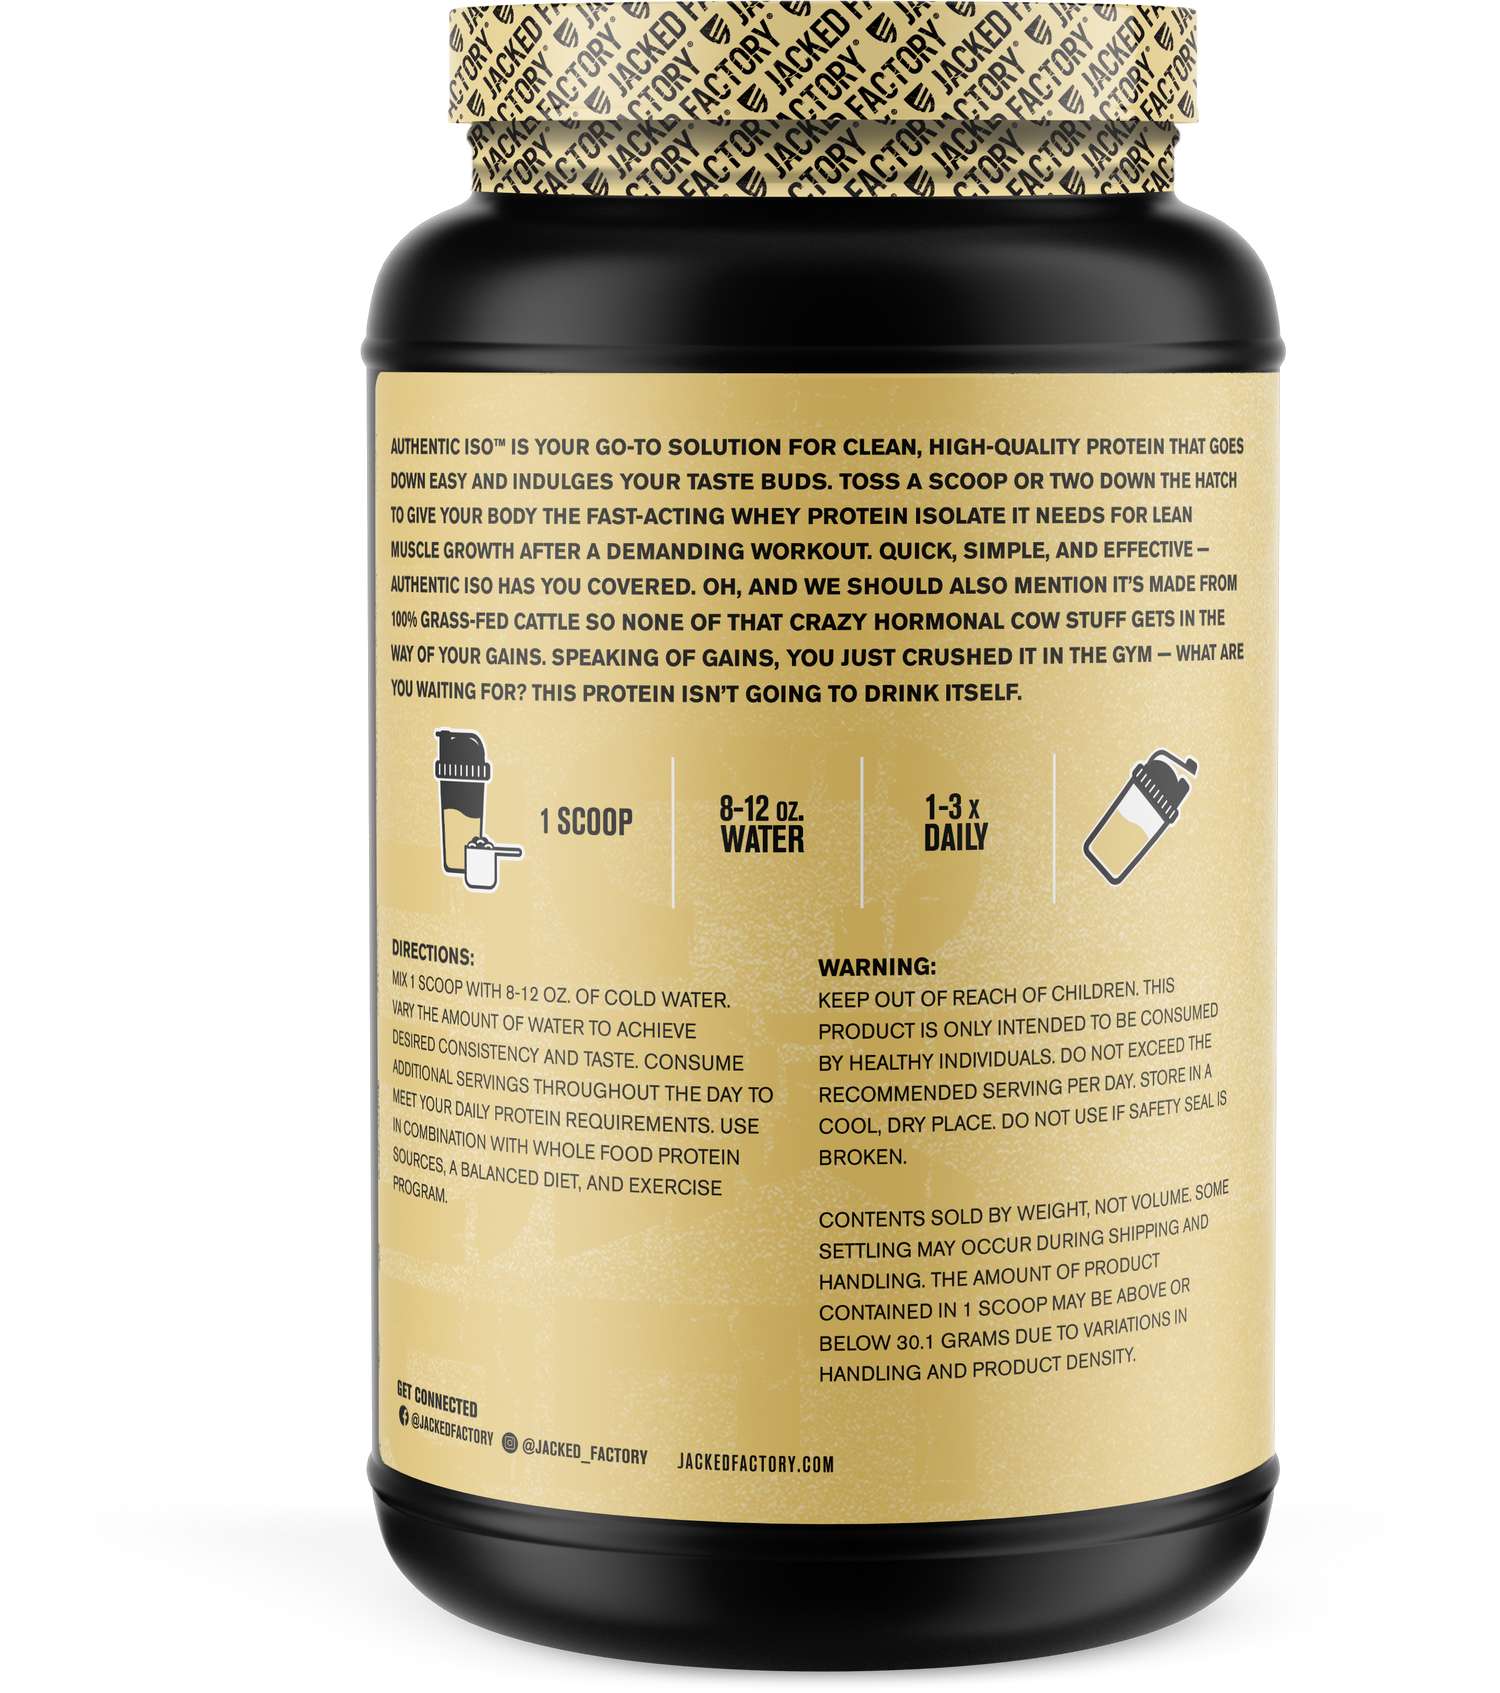 Jacked Factory's 30 servings Vanilla Authentic ISO protein in a black bottle with cream colored label showing product description